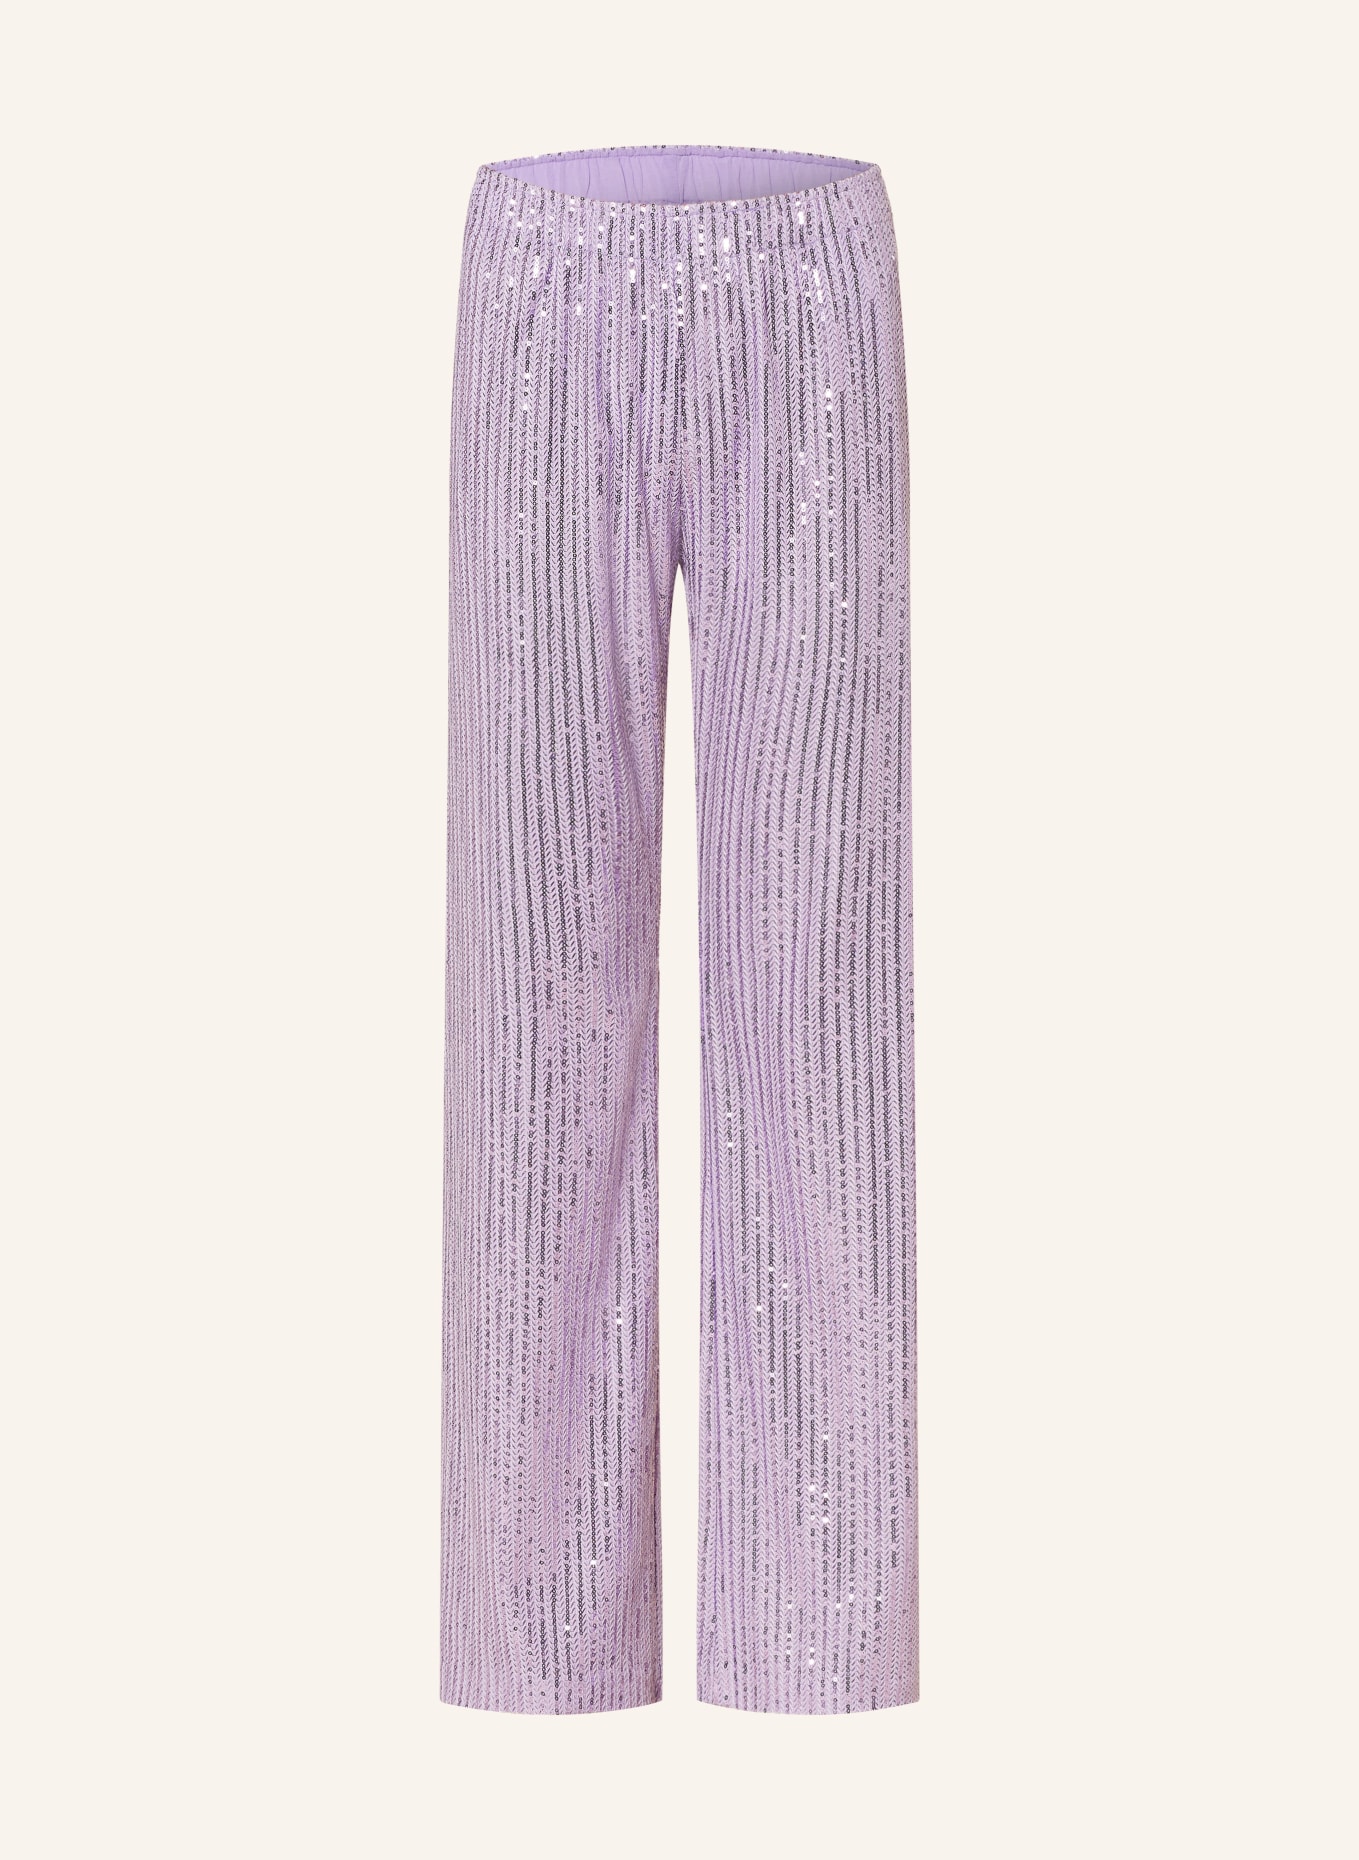 STINE GOYA Trousers MARKUS with sequins, Color: LAVENDER (Image 1)